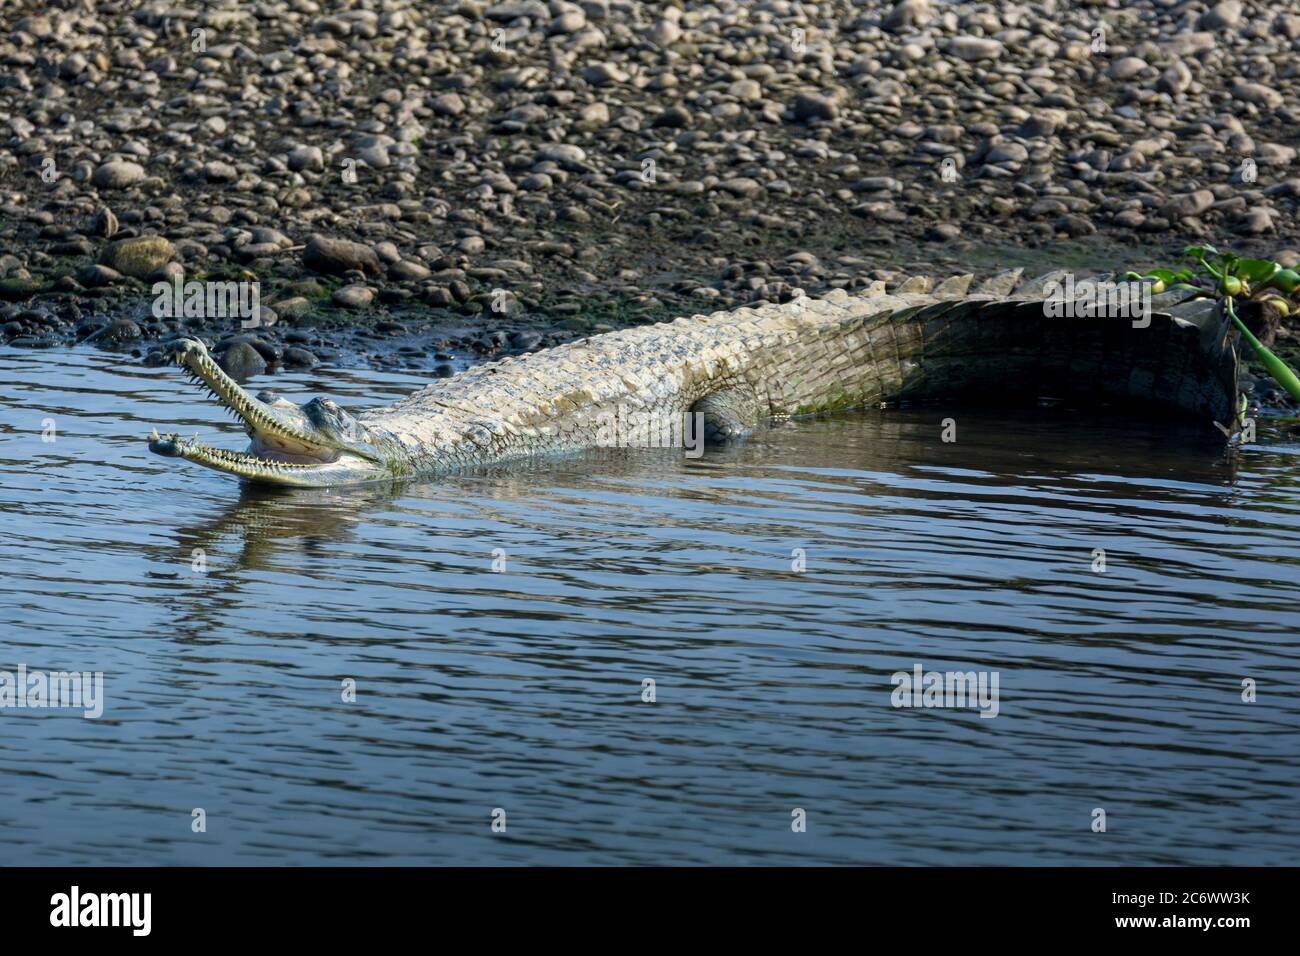 Indian gharial (Gavialis gangeticus), a fish-eating crocodile is resting in shallow water Stock Photo